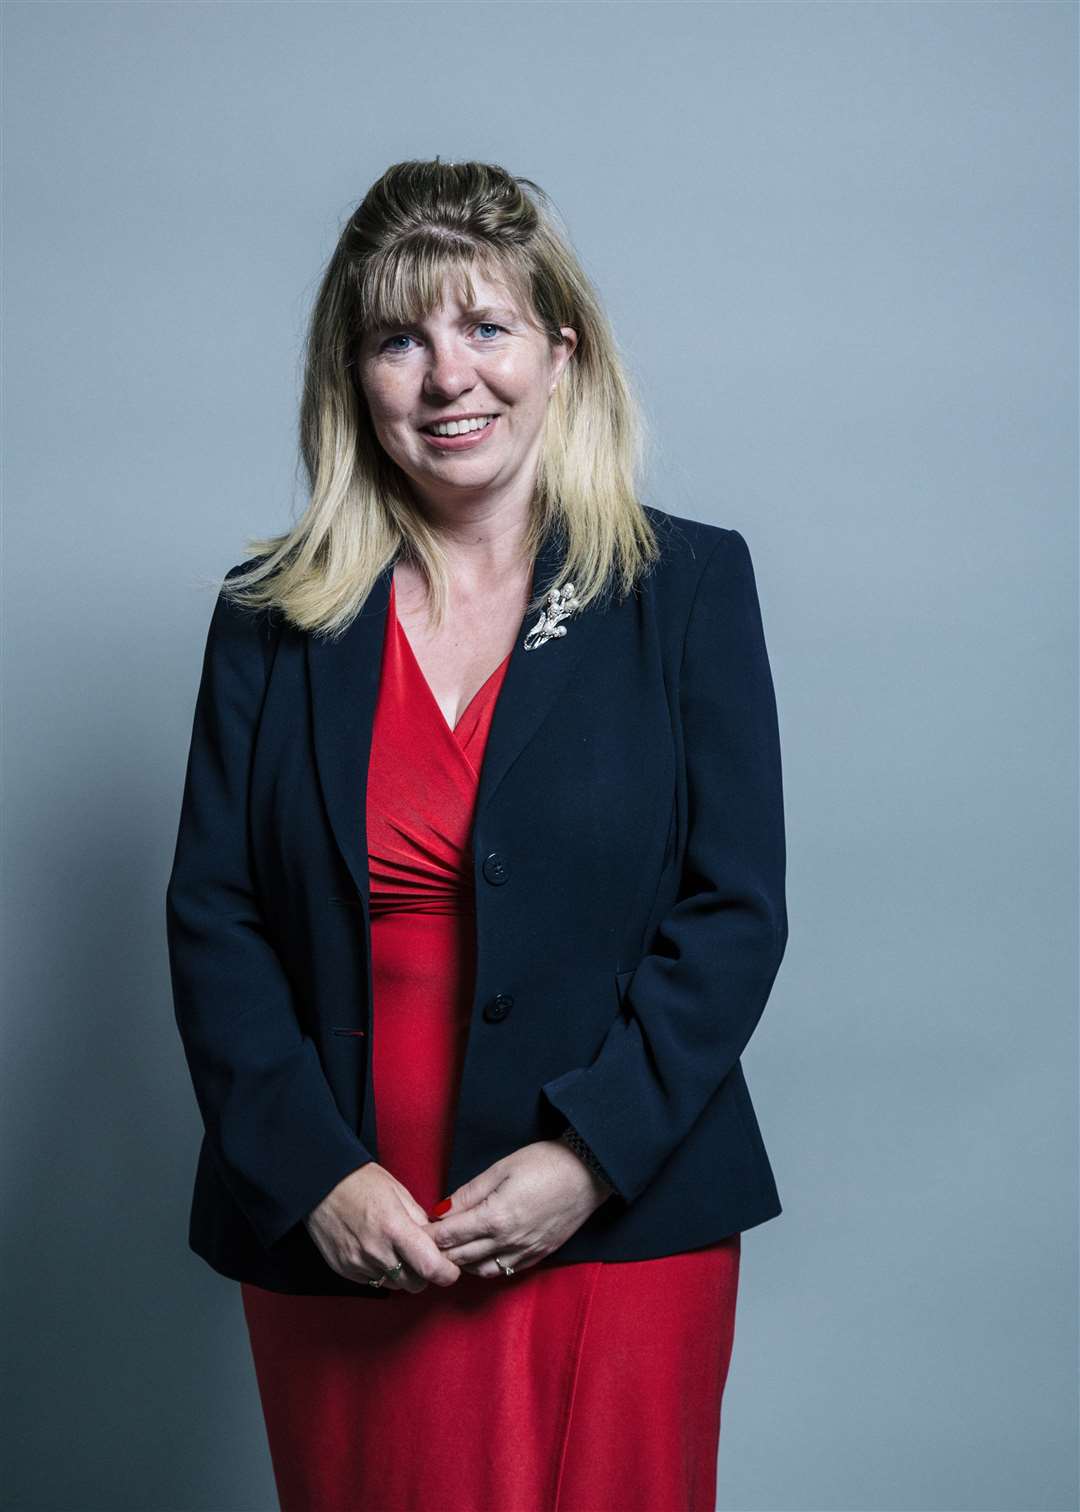 Women’s Minister Maria Caulfield was criticised by both Carol Vorderman and Mariella Frostrup for not attending the Women and Equalities Committee (Chris McAndrew/UK Parliament/PA)